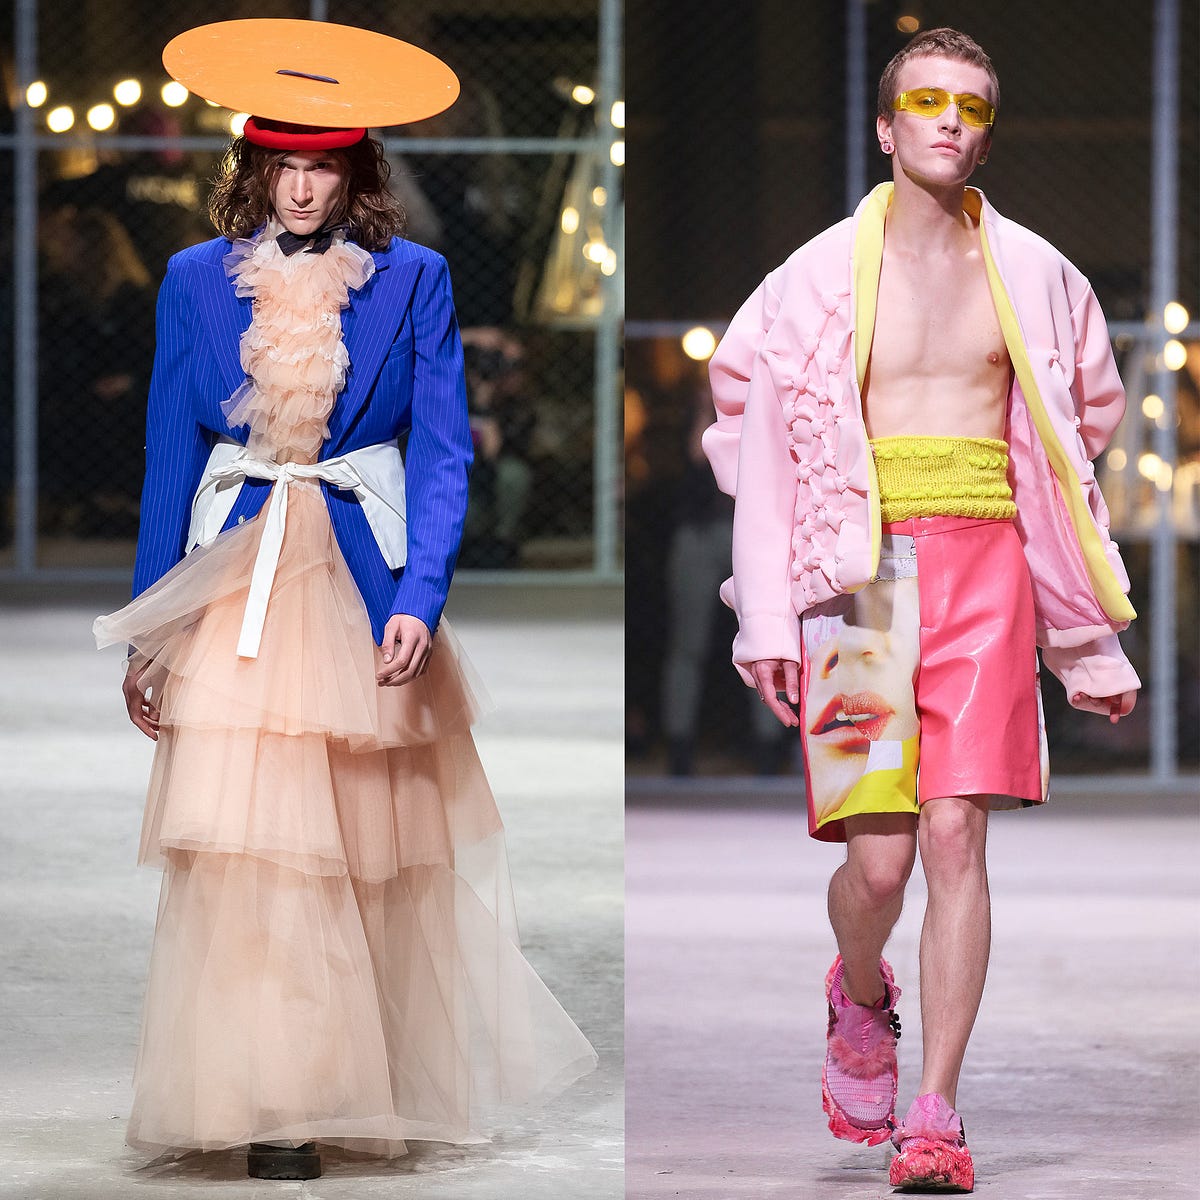 Genderless Fashion. Genderless fashion has never been more